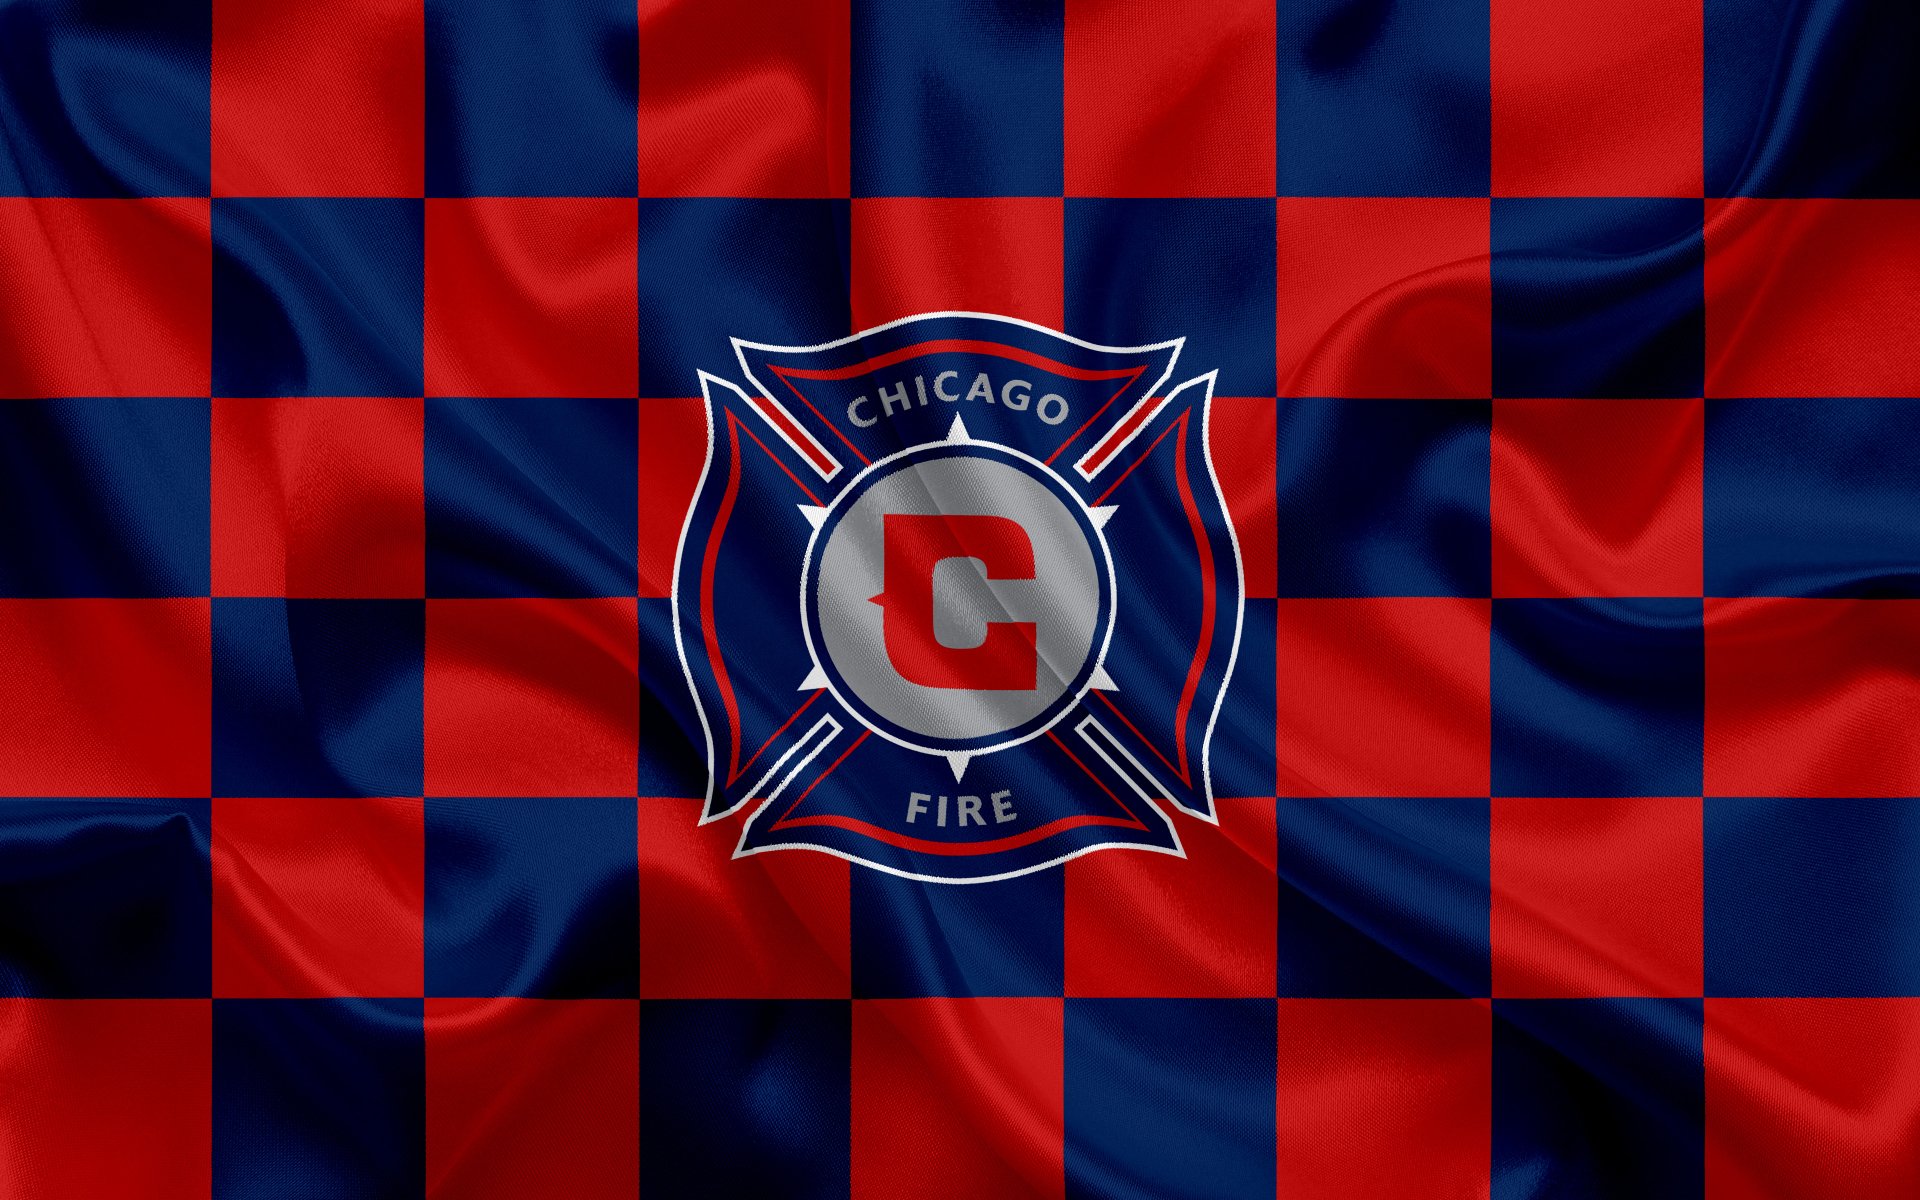 20 Chicago Fire FC HD Wallpapers and Backgrounds